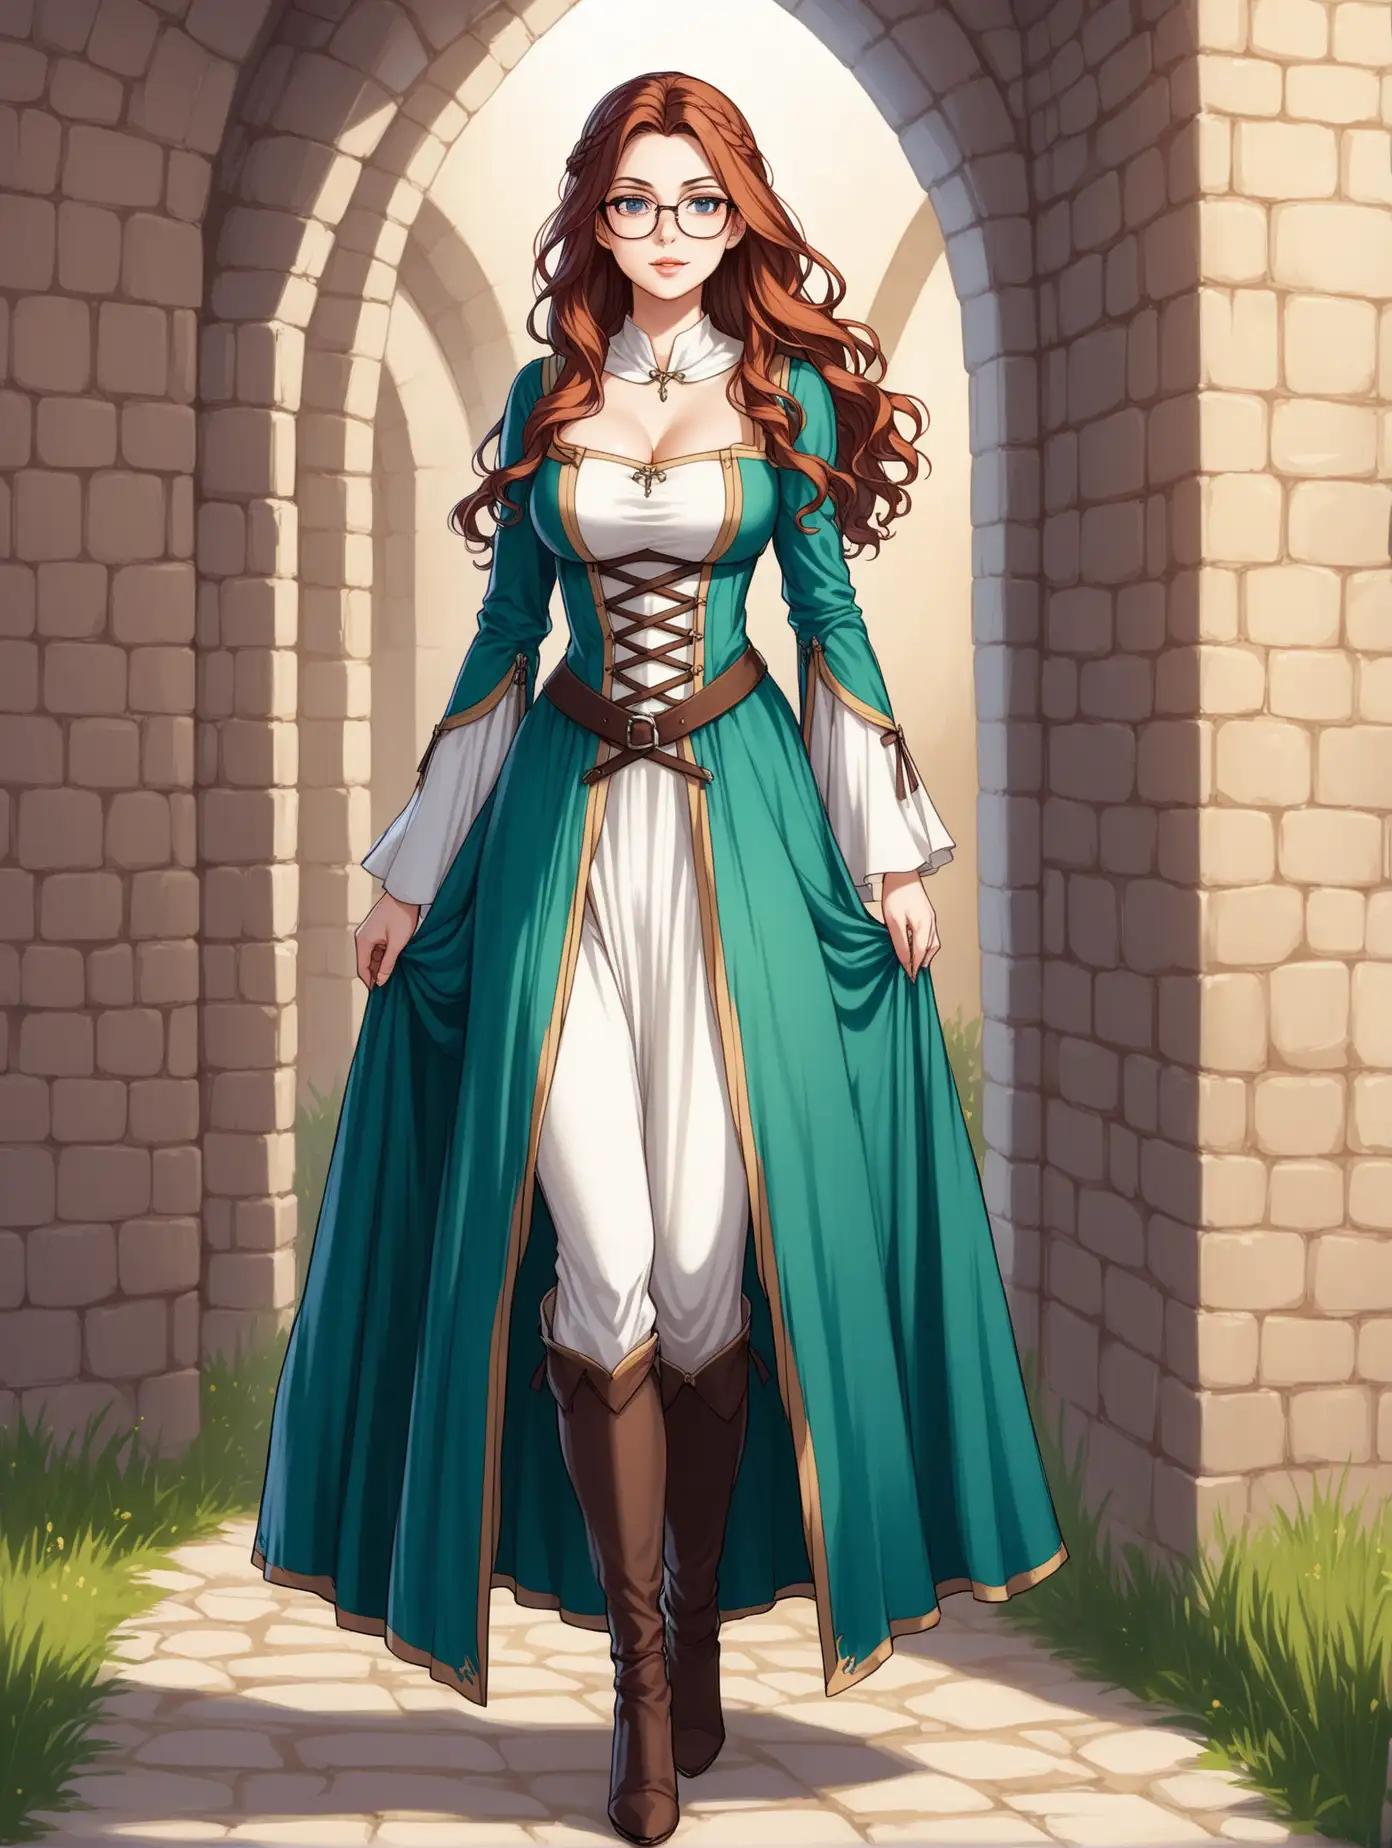 Attractive-Woman-in-Affordable-Medieval-Costume-Standing-Tall